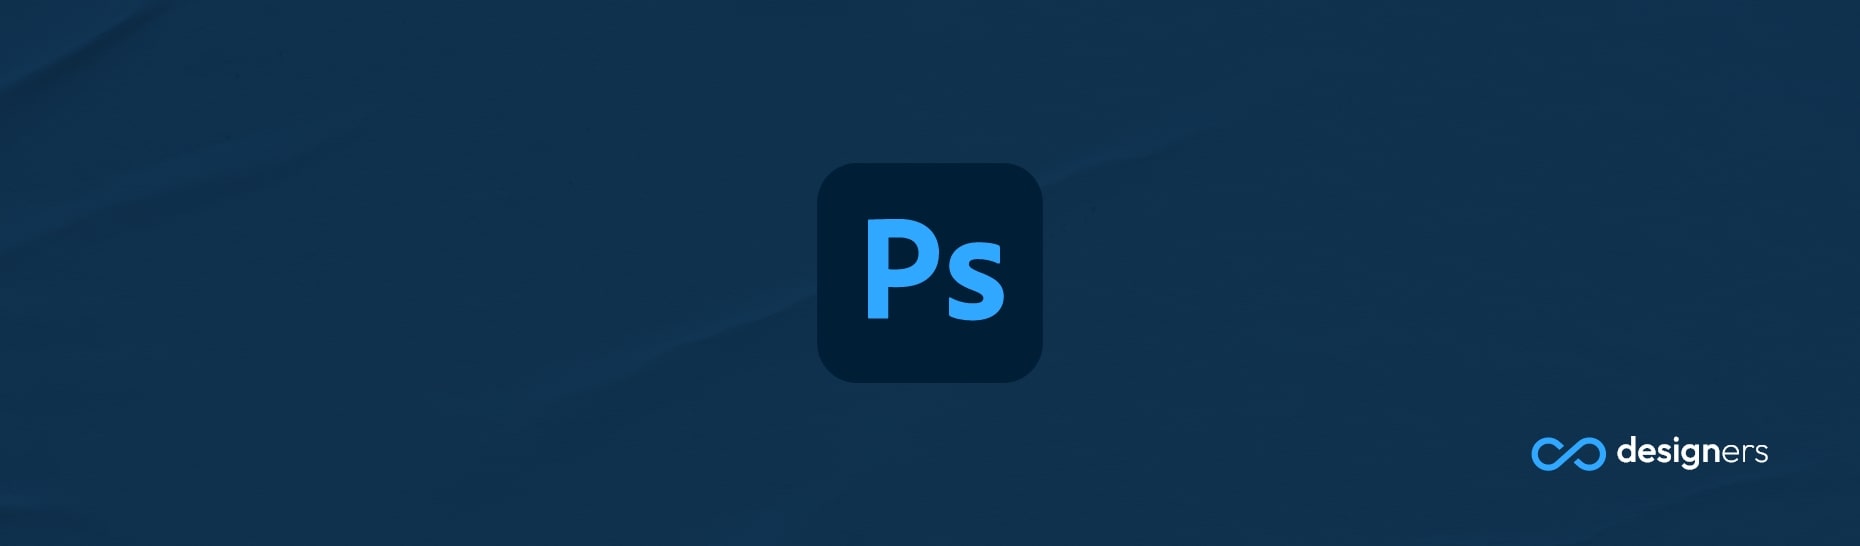 Why Can’t I Save as JPEG in Photoshop?